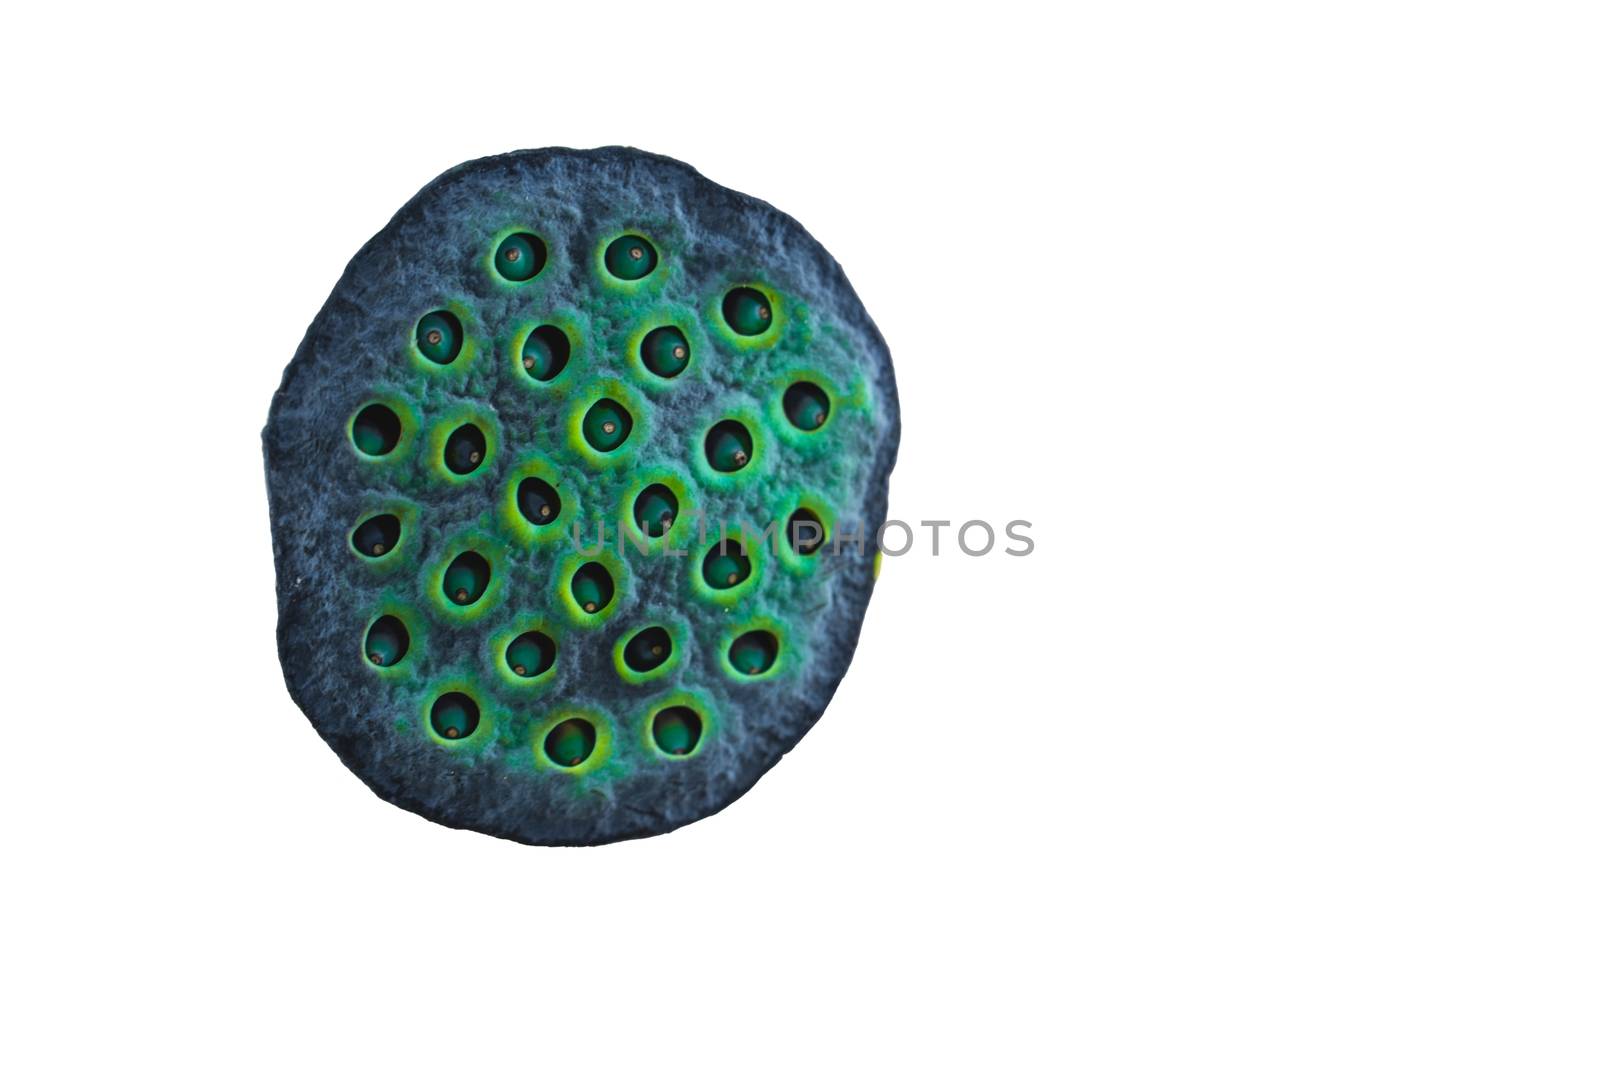 The Lotus seed pods isolate on white background with space for putting text. Green lotus seed pods background